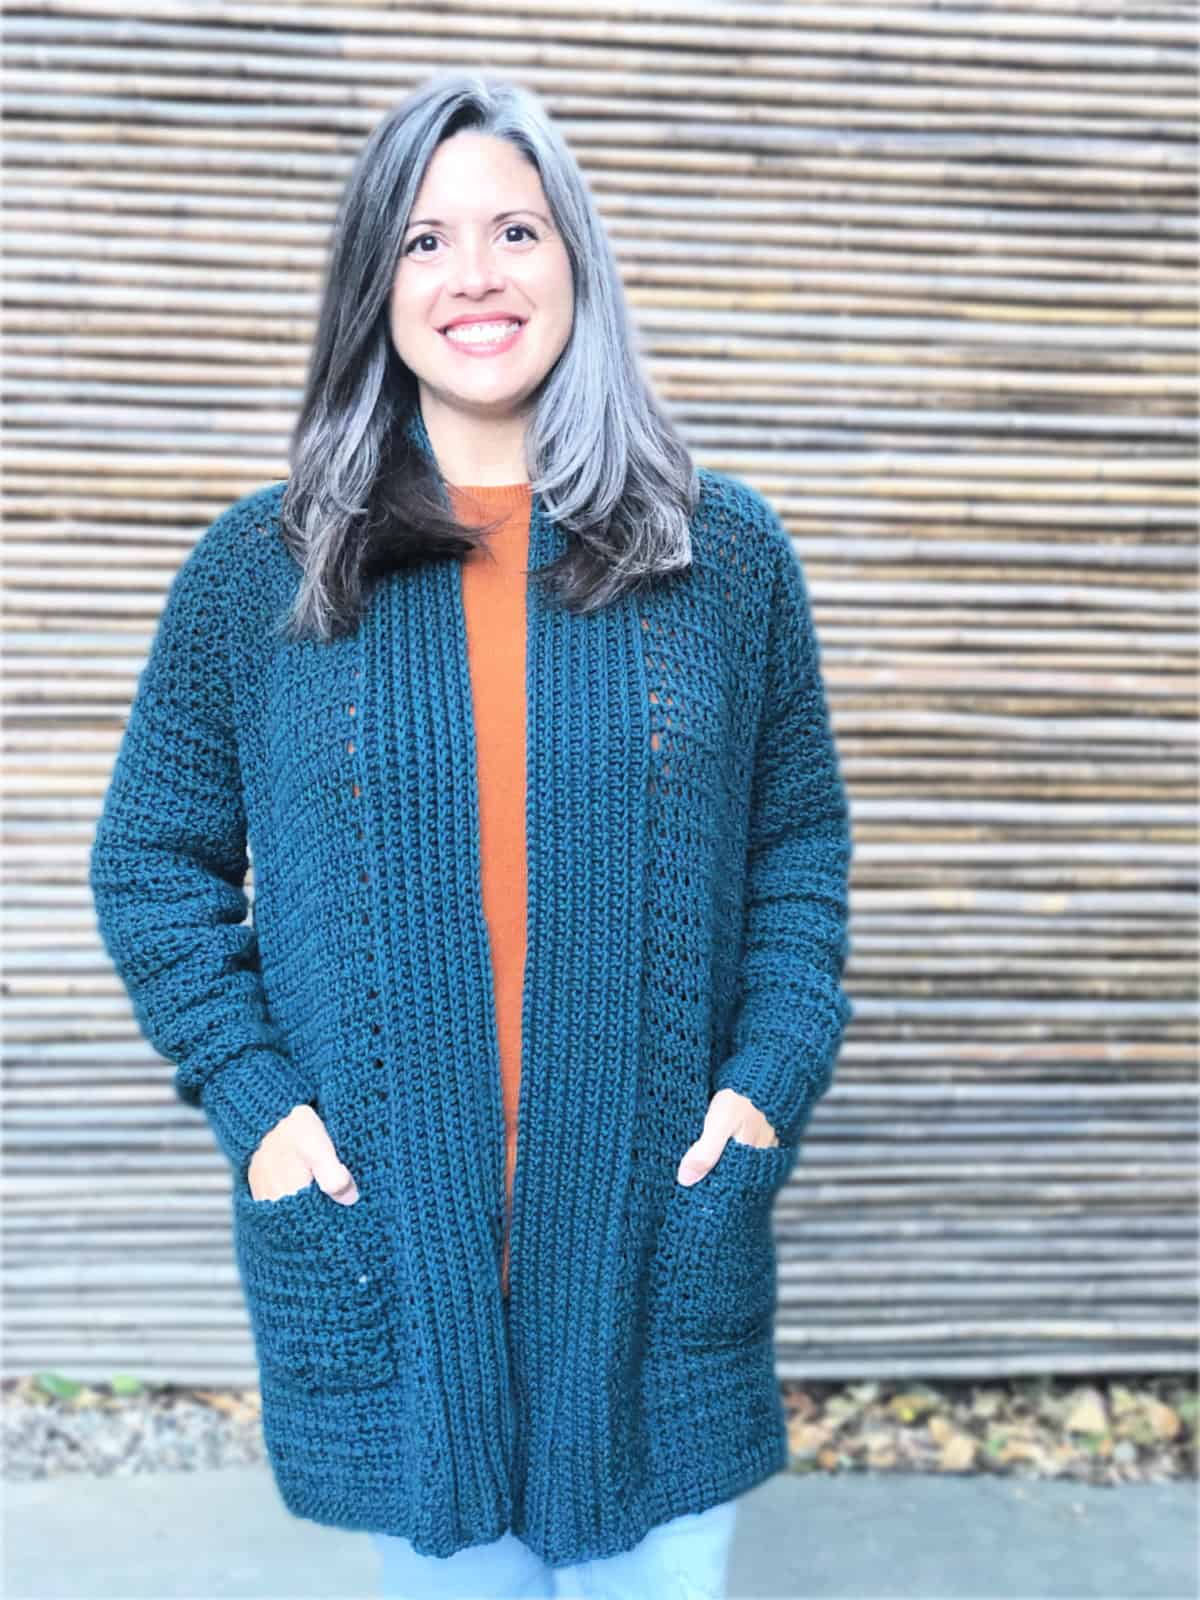 Woman smiling in with hands in pockets of blue green crochet cardigan.